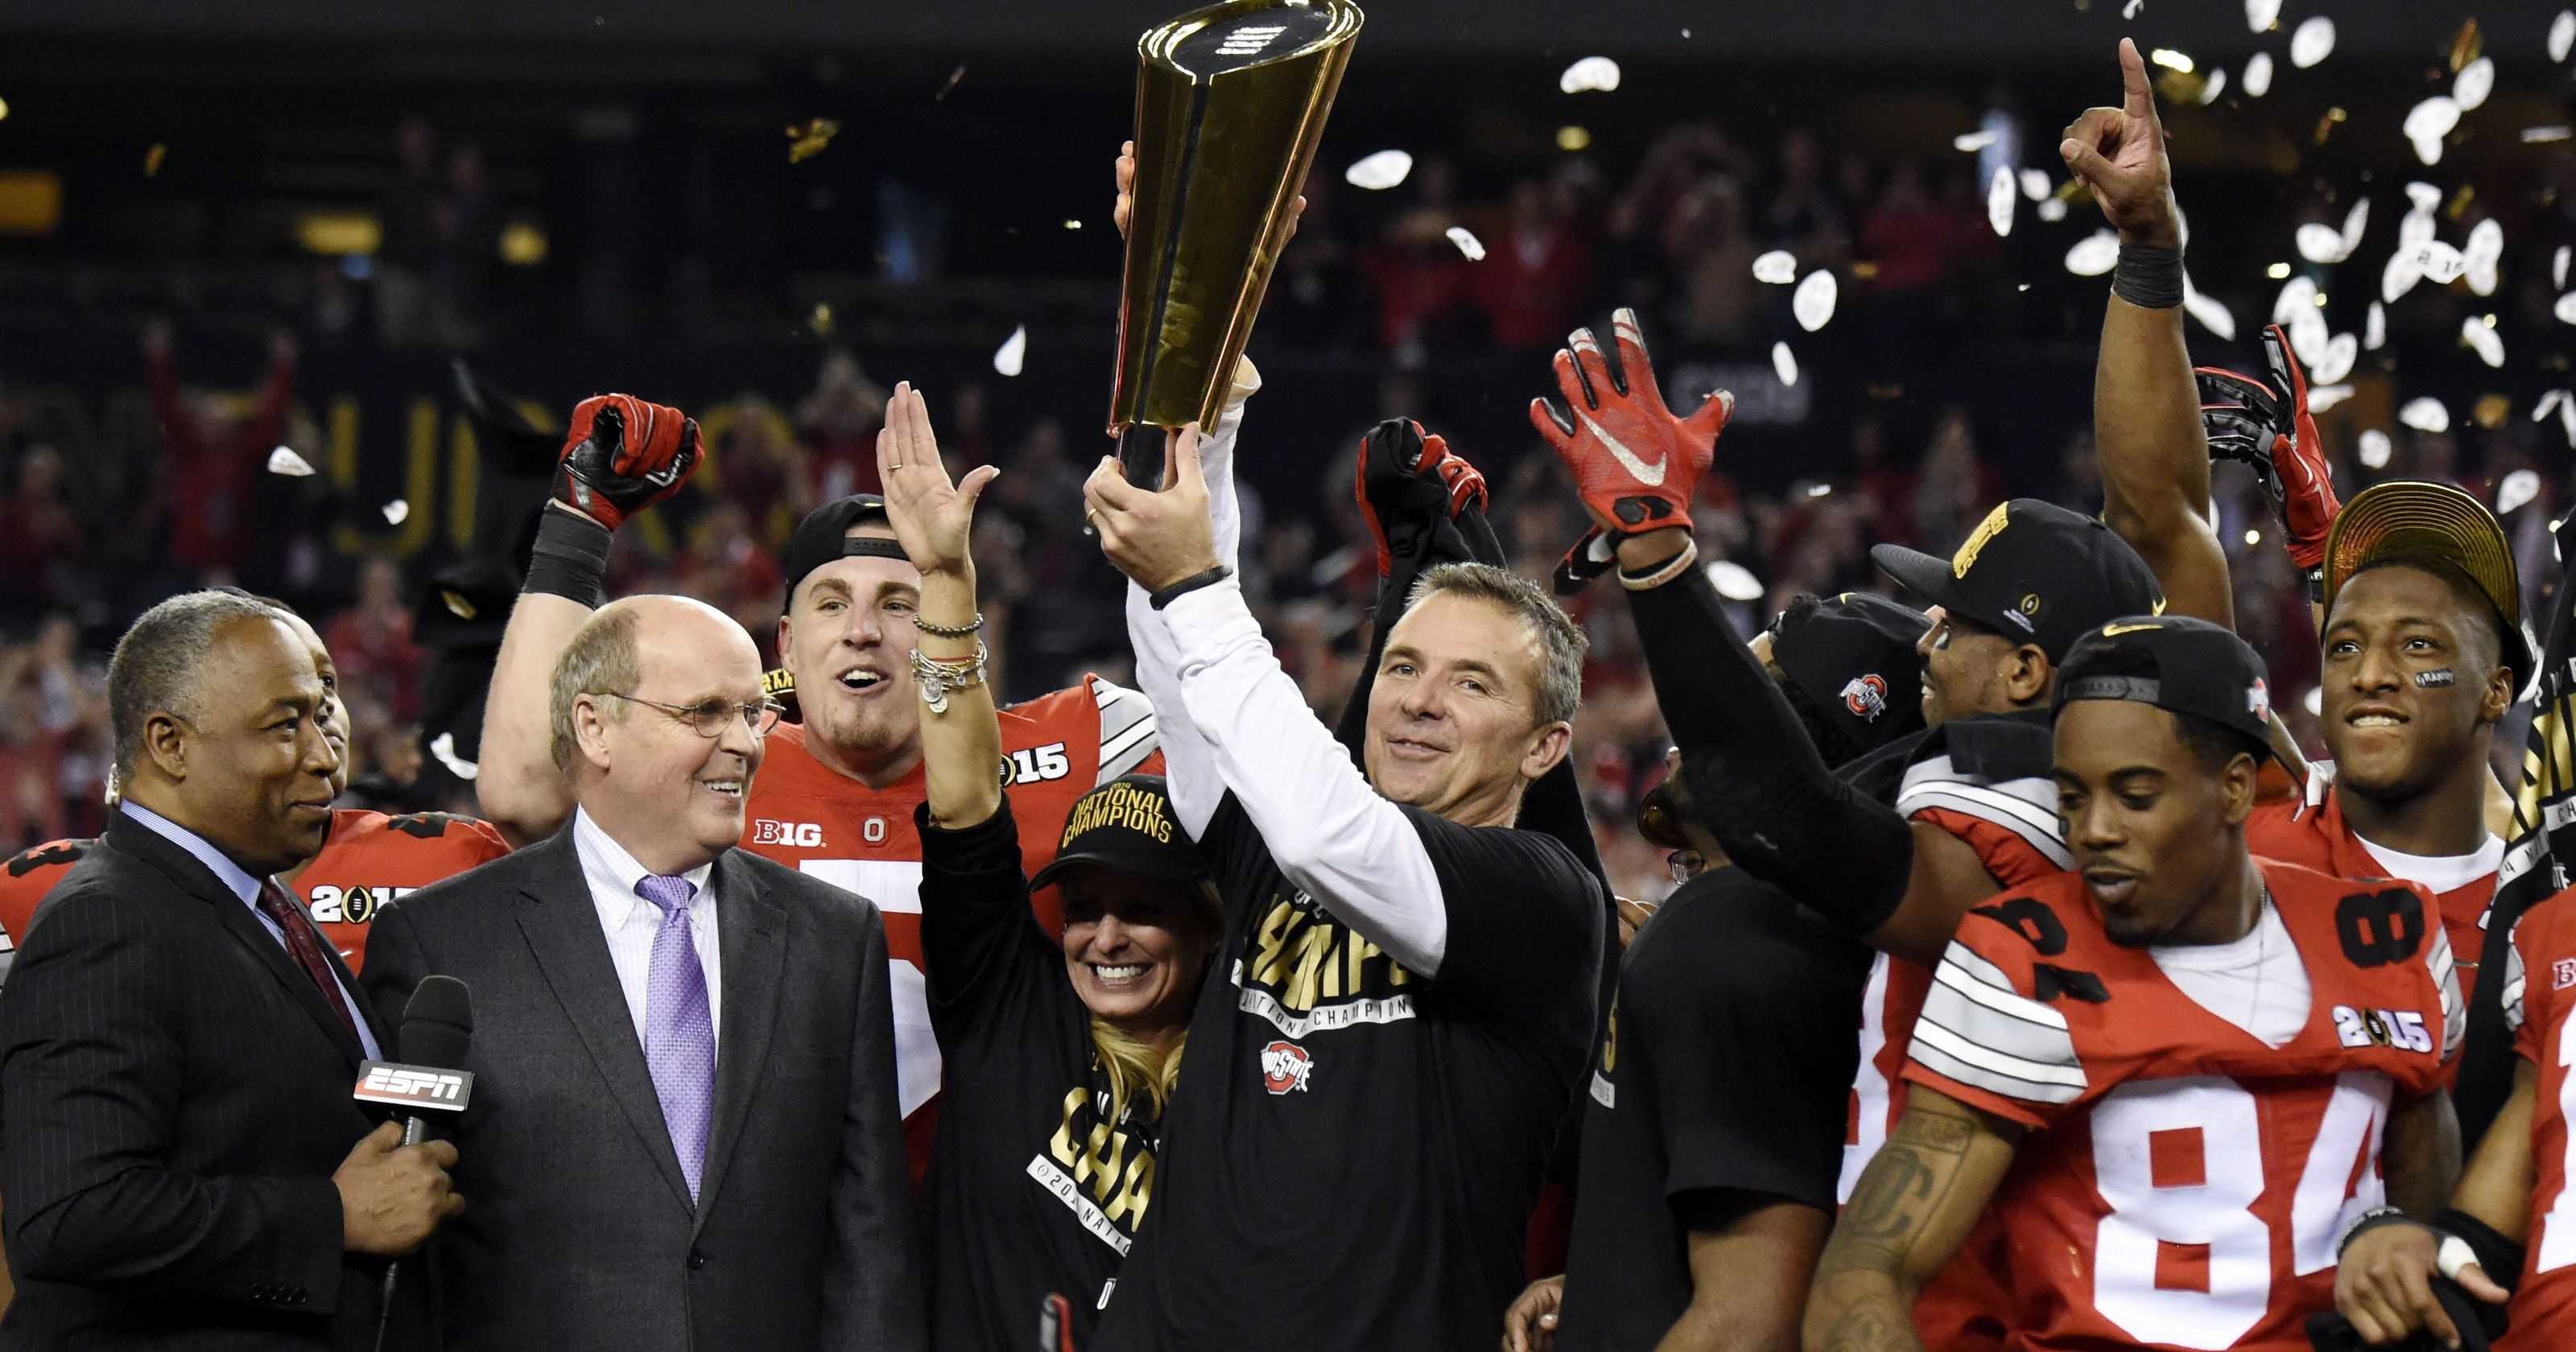  How Should Urban Meyer be Remembered?